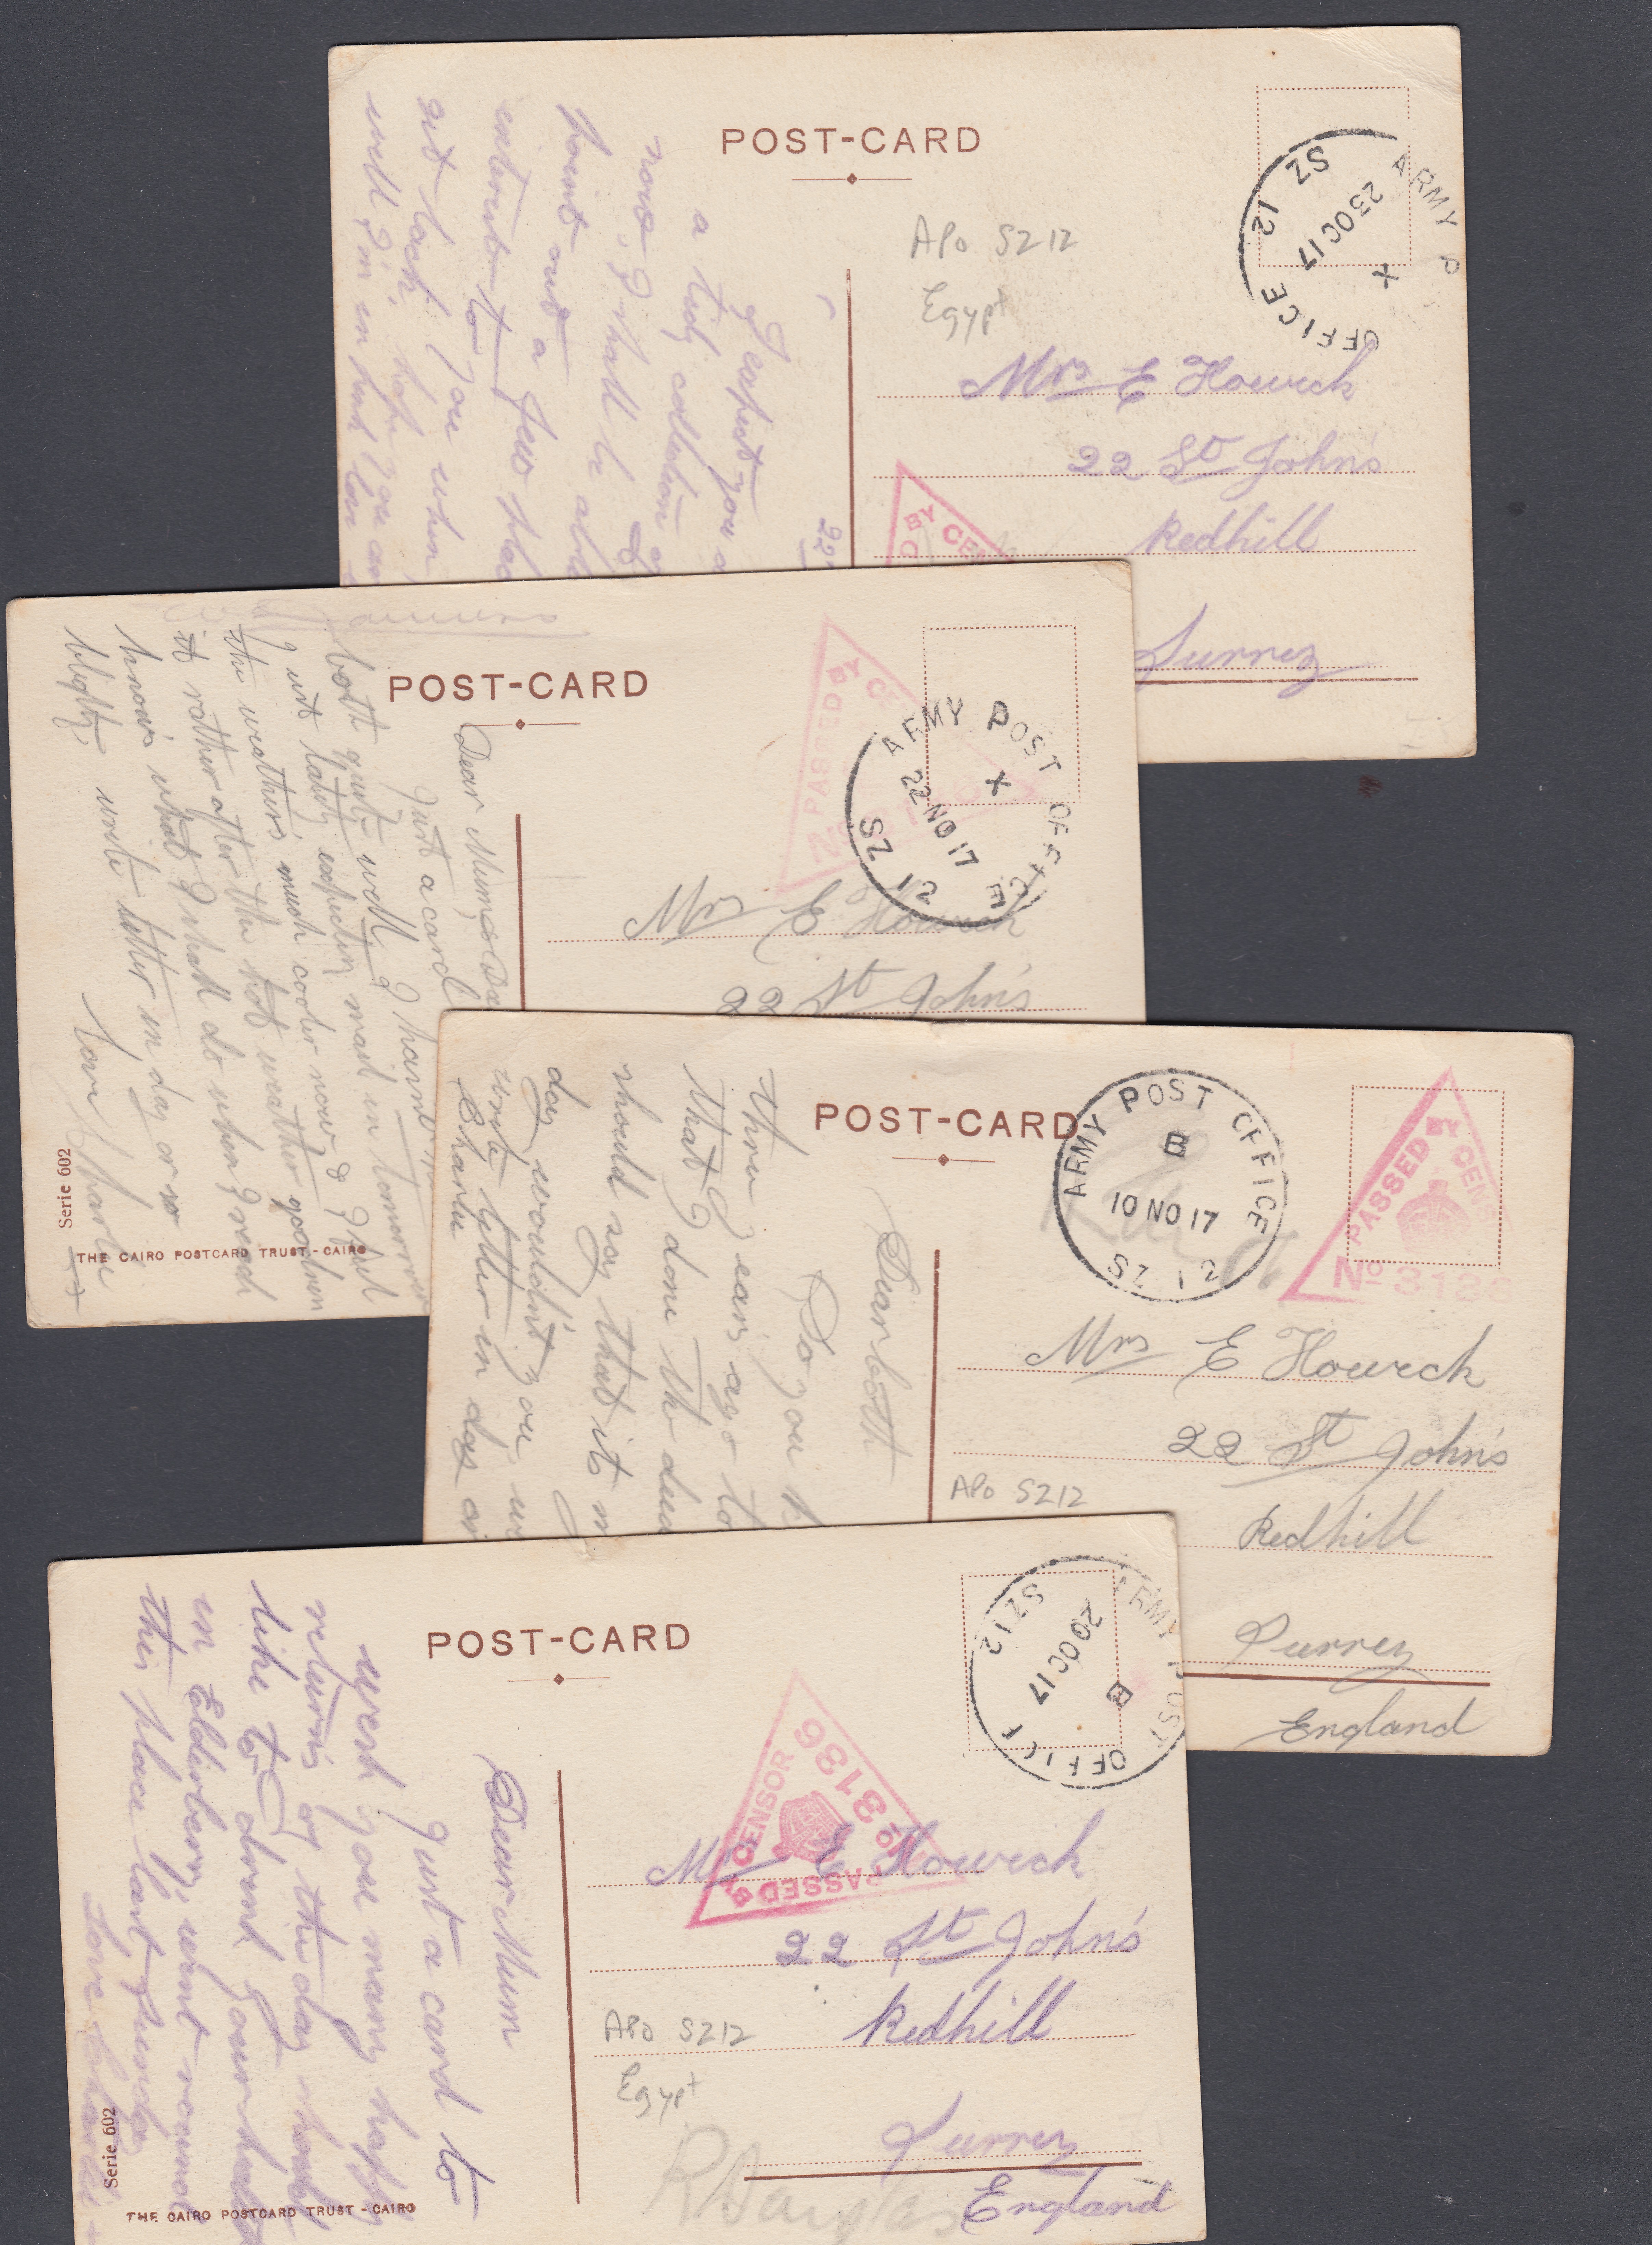 POSTAL HISTORY : EGYPT, four WWI postcards sent from Egypt to Redhill, Surrey.